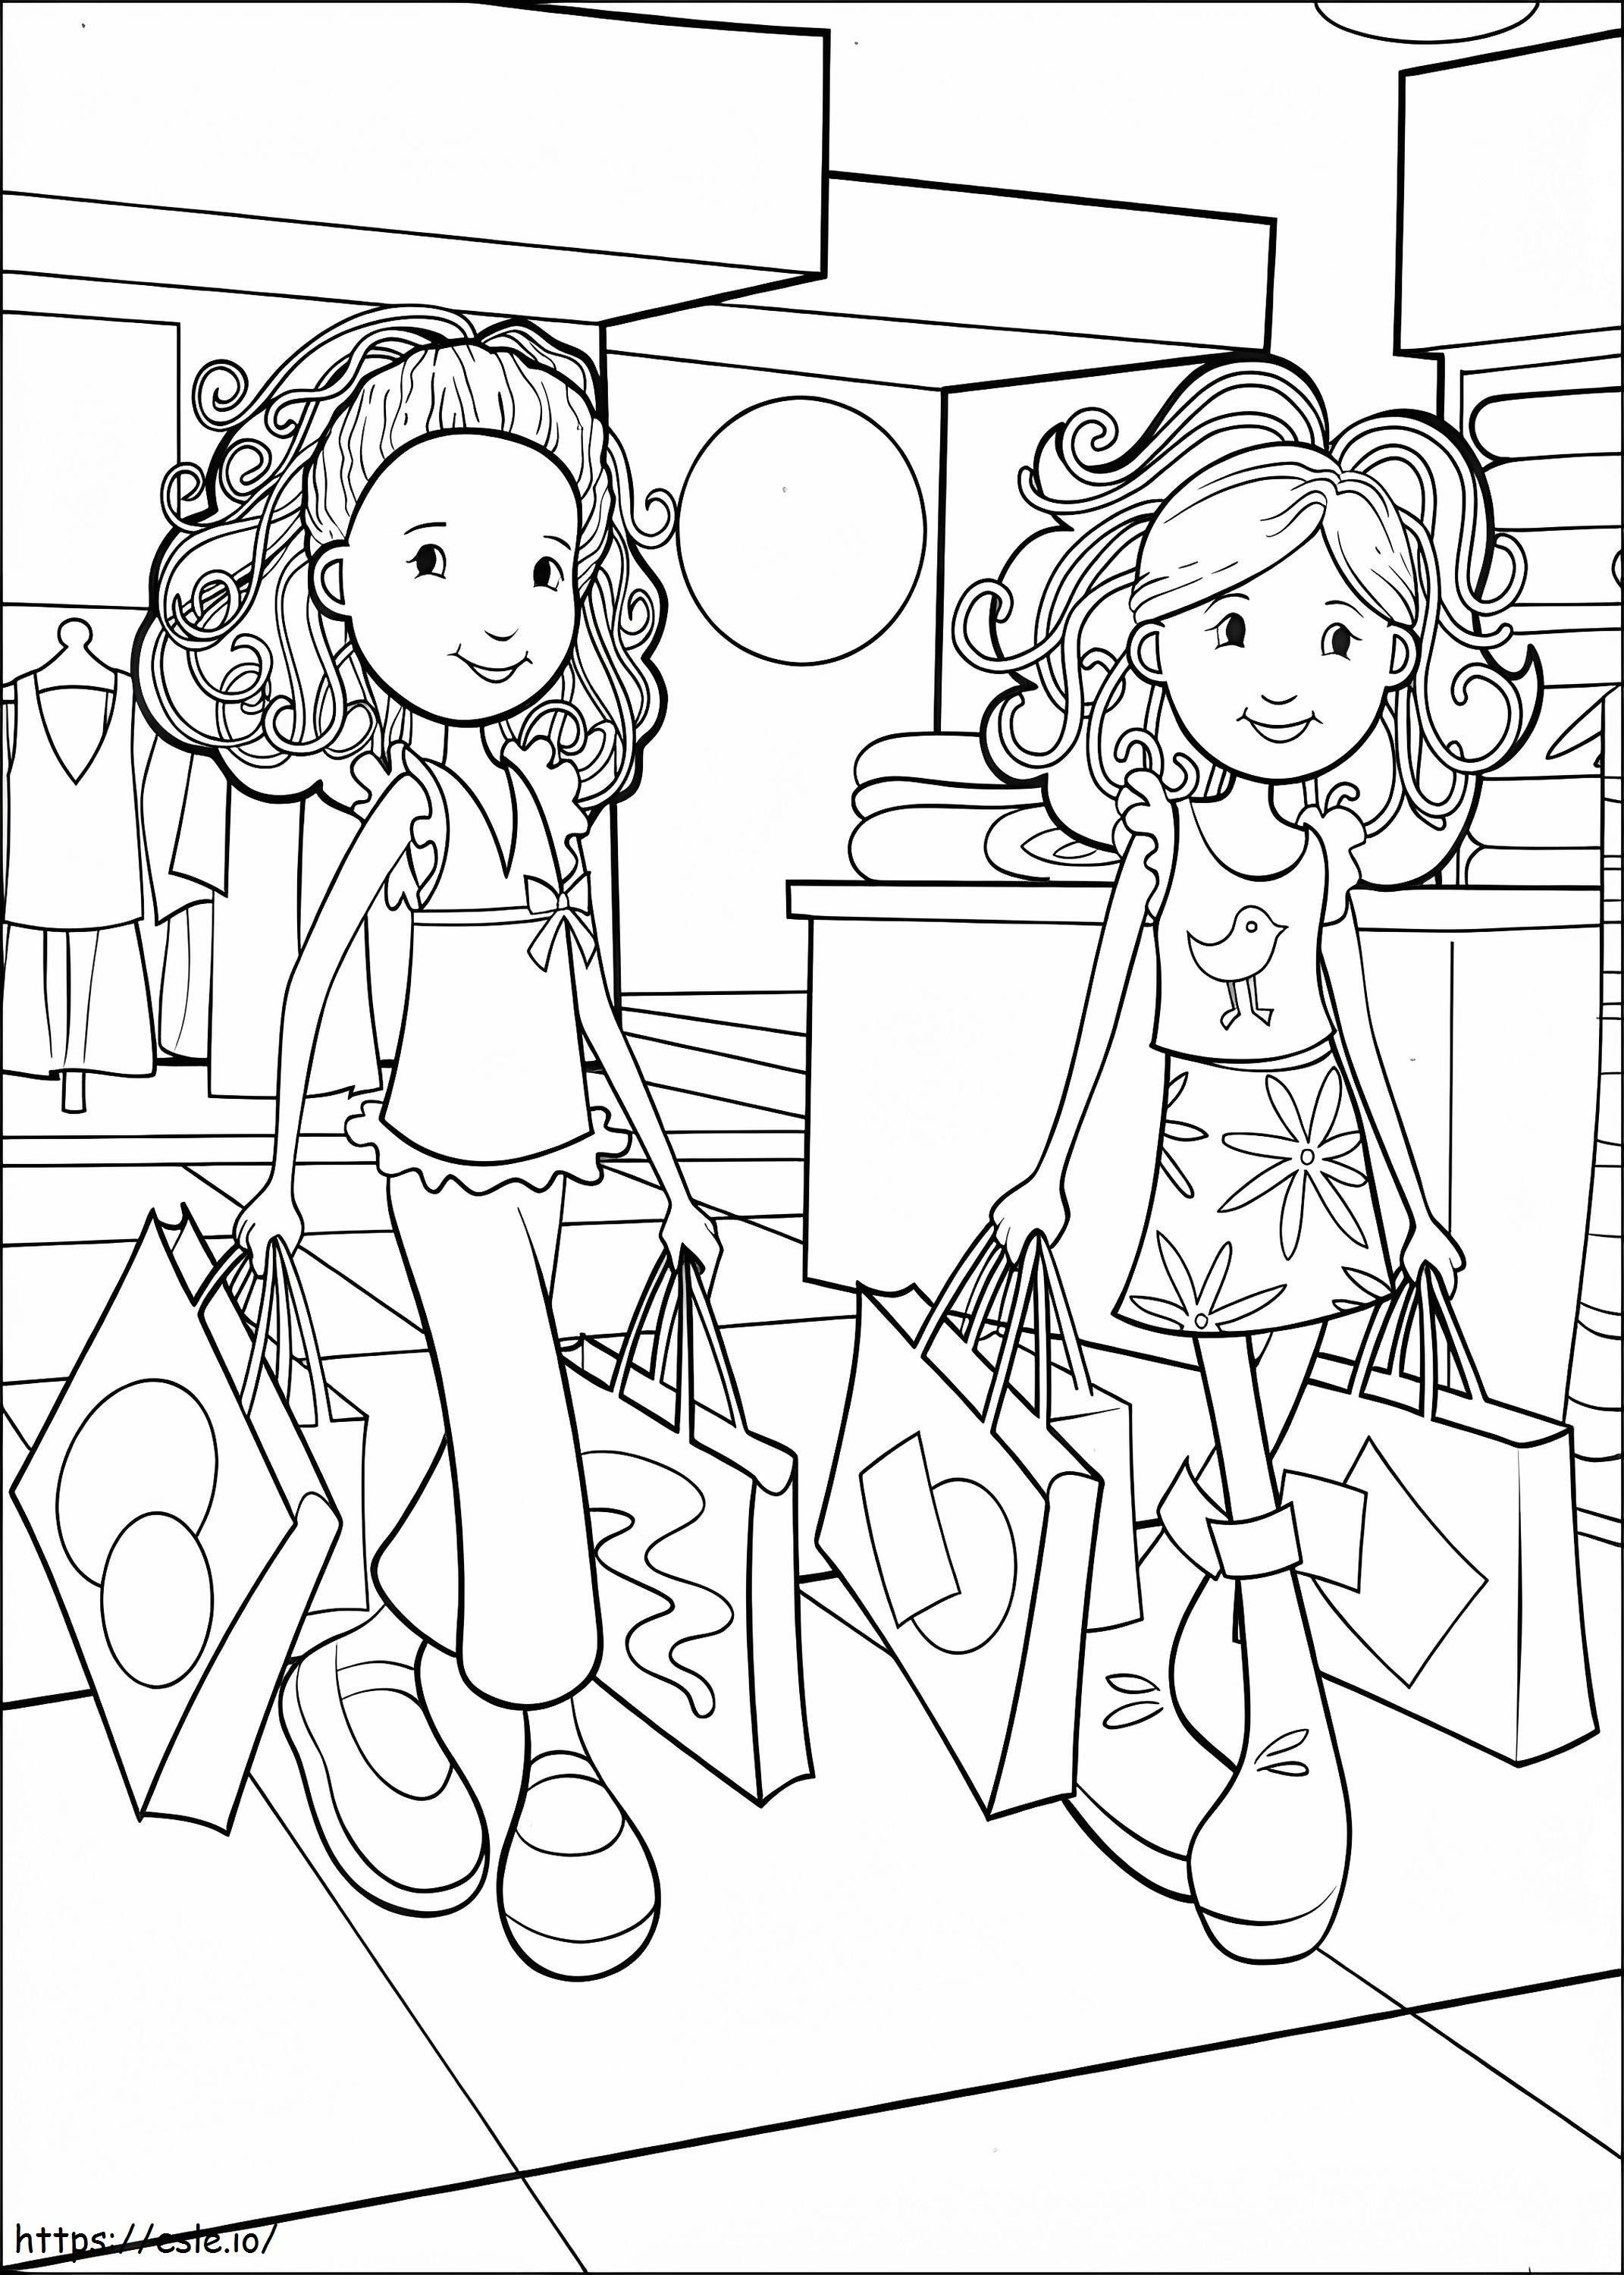 Groovy Girls Go Shopping coloring page